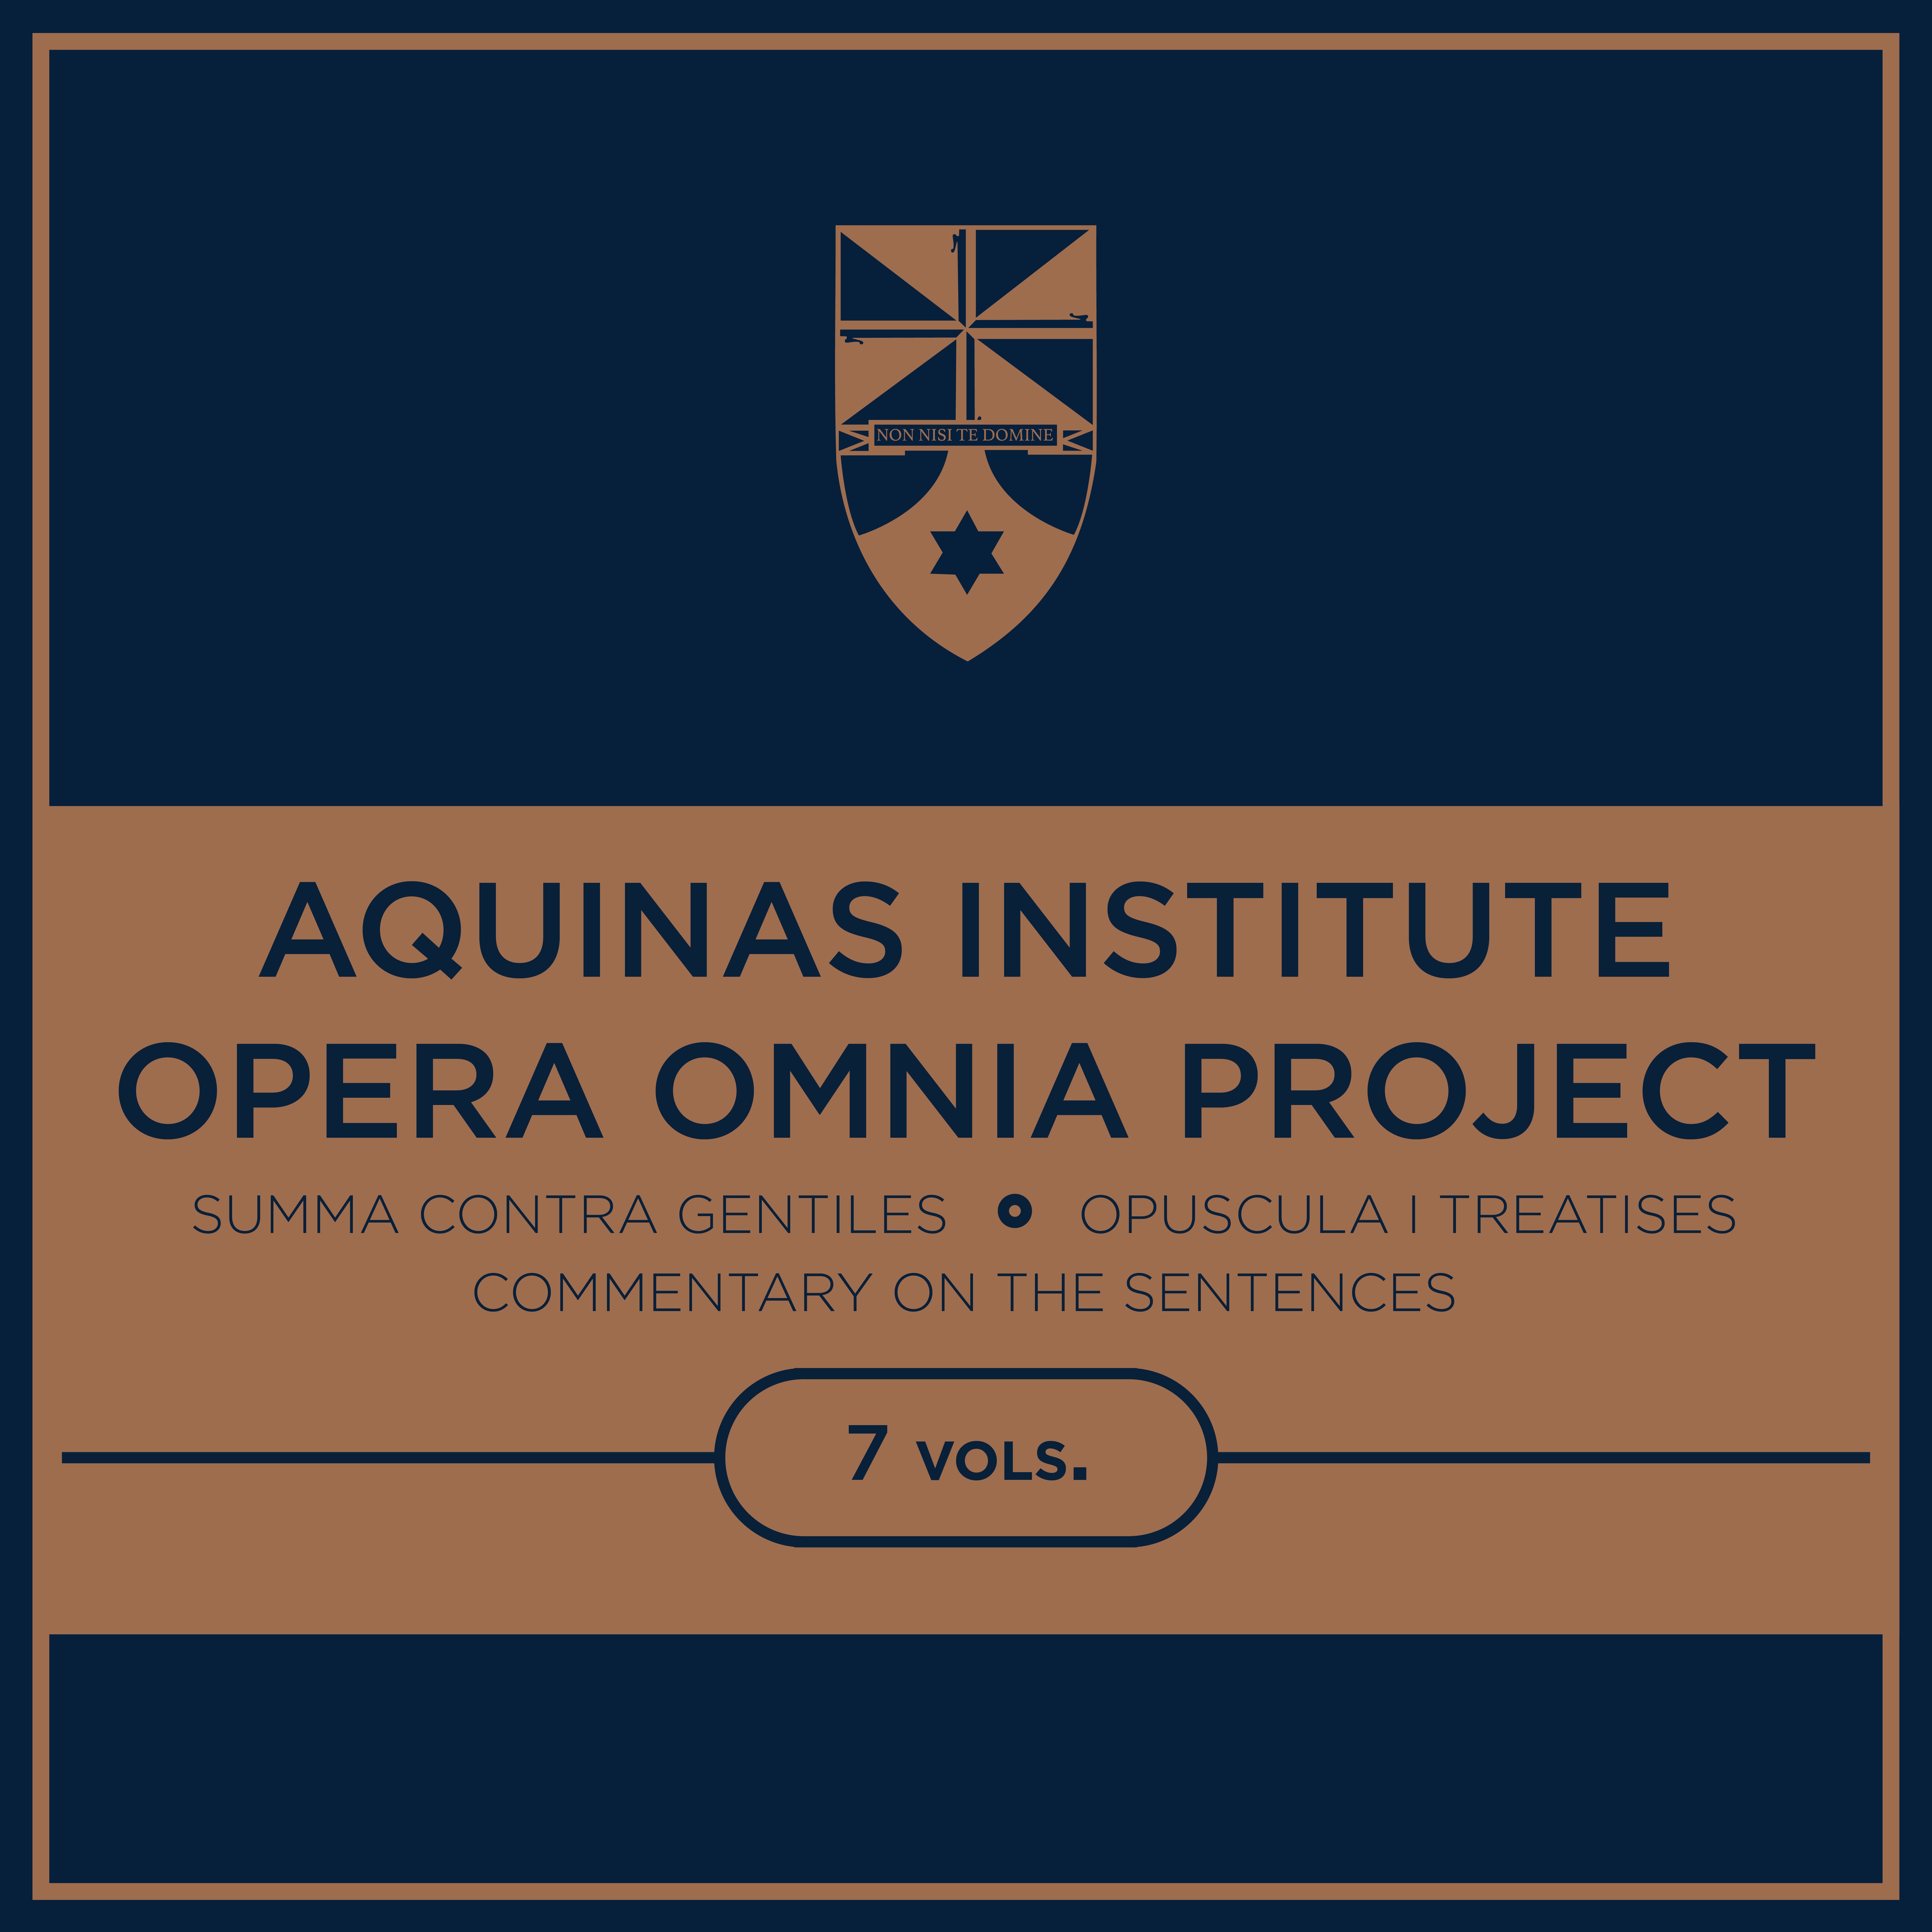 Aquinas Institute Opera Omnia Project: Summa Contra Gentiles, Commentary on the Sentences, and Opuscula I Treatises (7 vols.)